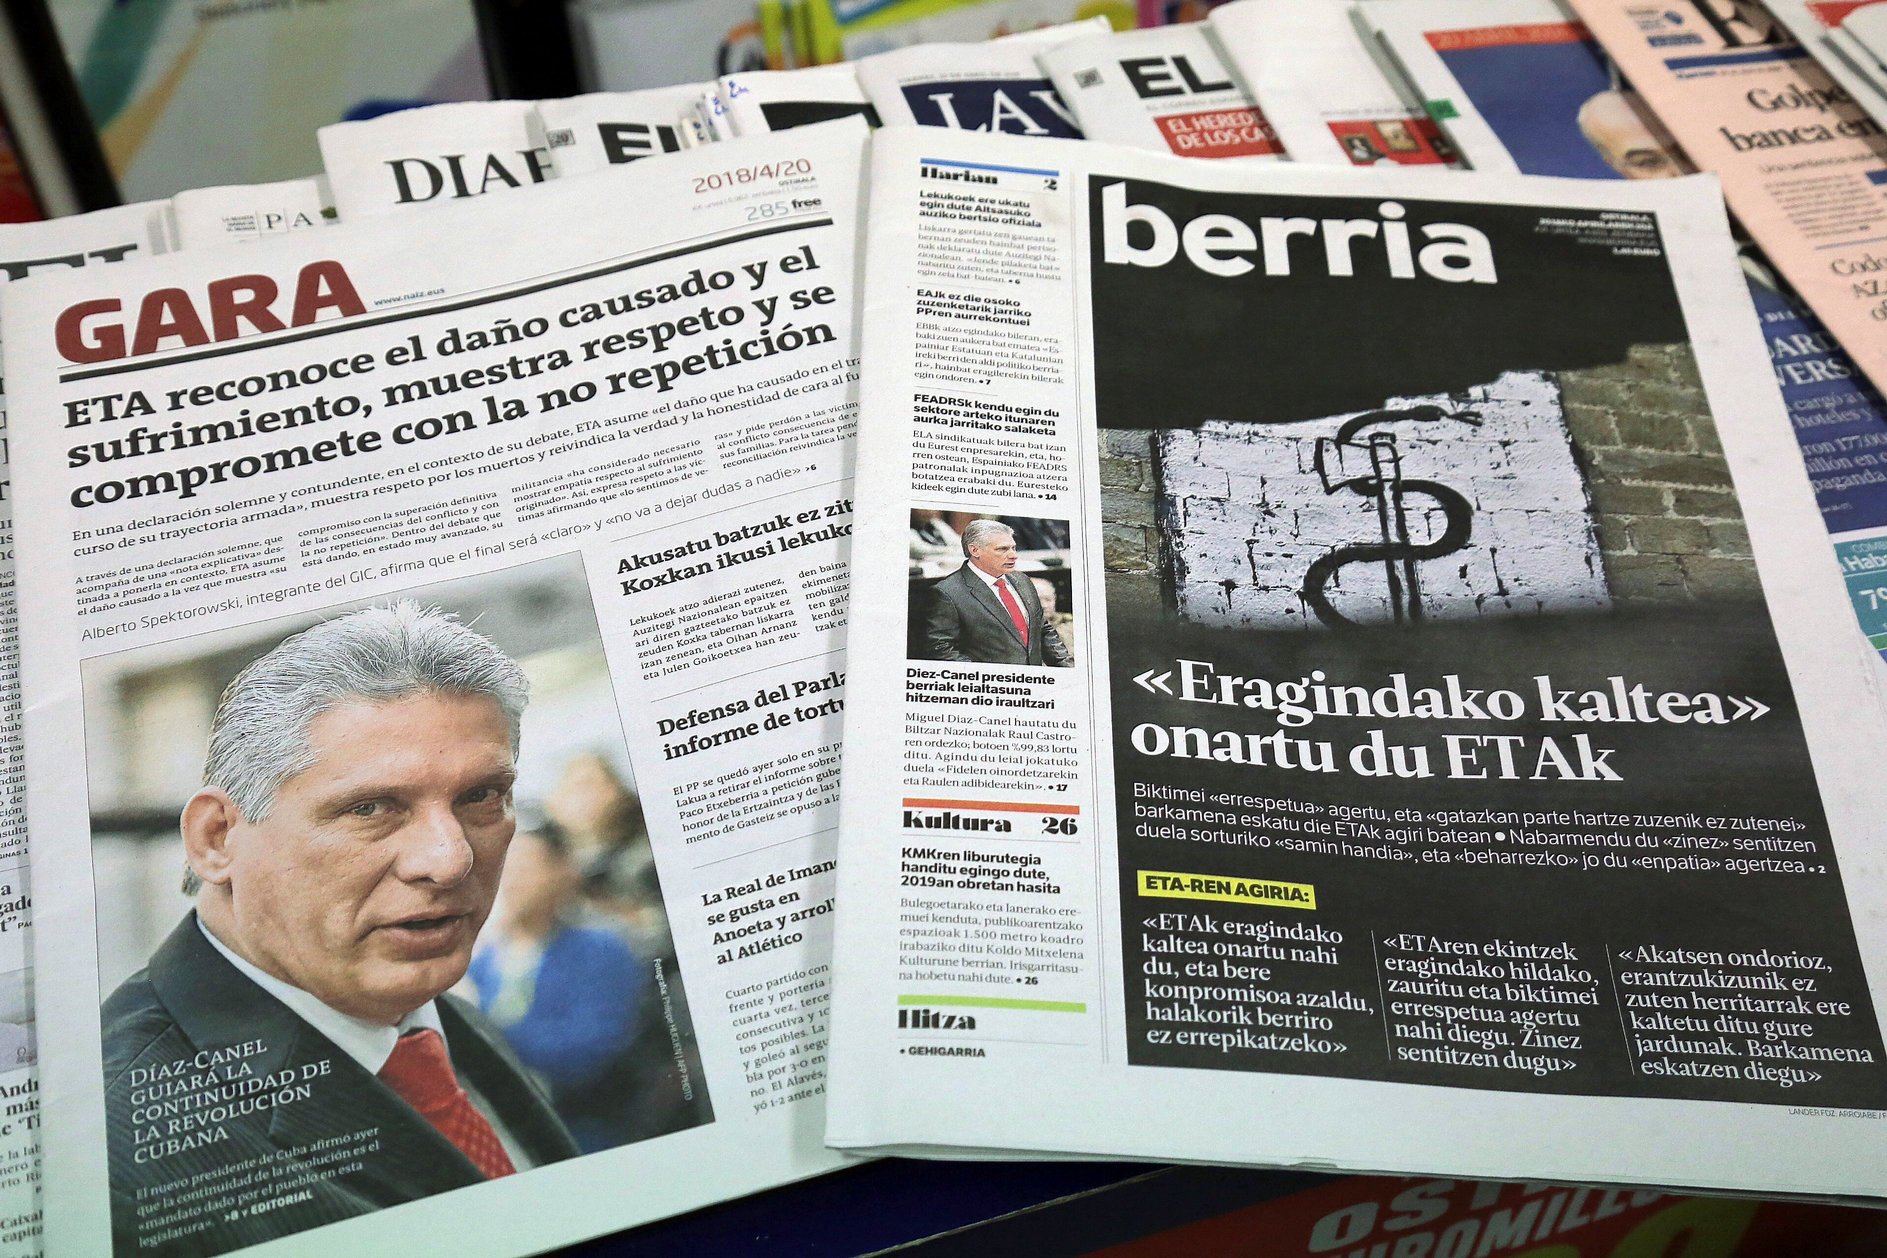 epa06680906 Basque newspapers Gara and Berria are pictured at a press kiosk showing ETA's last announcement asking for forgiveness on their front pages in San Sebastian, Spain, 20 April 2018. According to ETA's release, the terrorist band admits the 'caused damage' and their 'direct responsibility' in the 'unmeasured pain' suffered by the Basque society, and assures the band is 'really sorry' for the victims, to whom they express their 'respect'. The separatist terrorist group have made their apologies public by a press release to Gara and Berria Basque newspapers in which they voice their regrets for the pain caused to all the affected by their actions and asks for 'forgiveness' to their victims who were not 'directly' involved in the 'conflict'. The apologize arrives as ETA is expected to announce its definitive and voluntary surcease of violence 05 May 2018.  EPA/Gorka Estrada